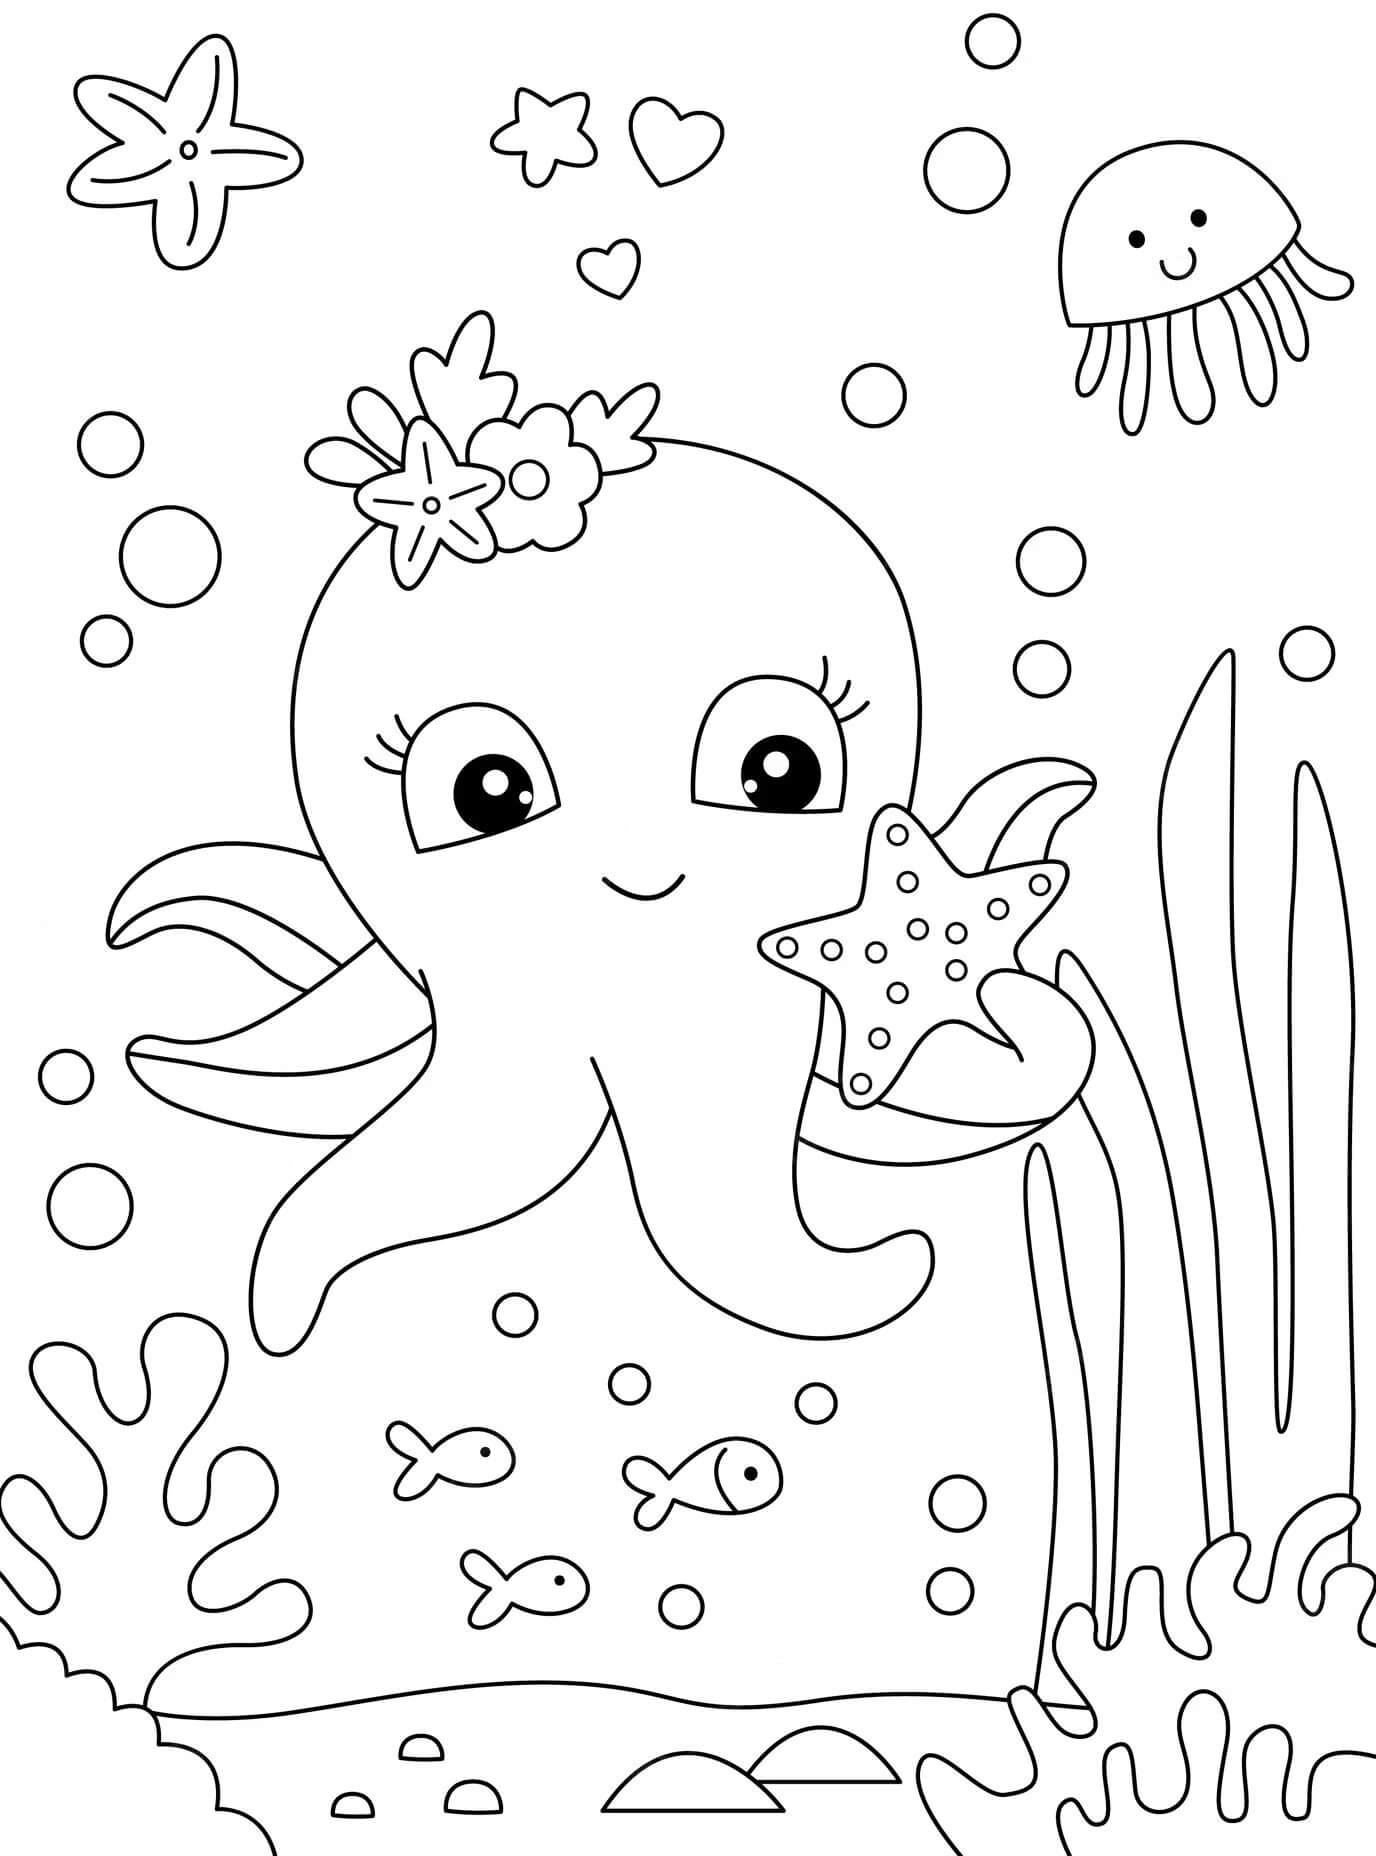 Octopus Holding Starfish coloring page - Download, Print or Color ...